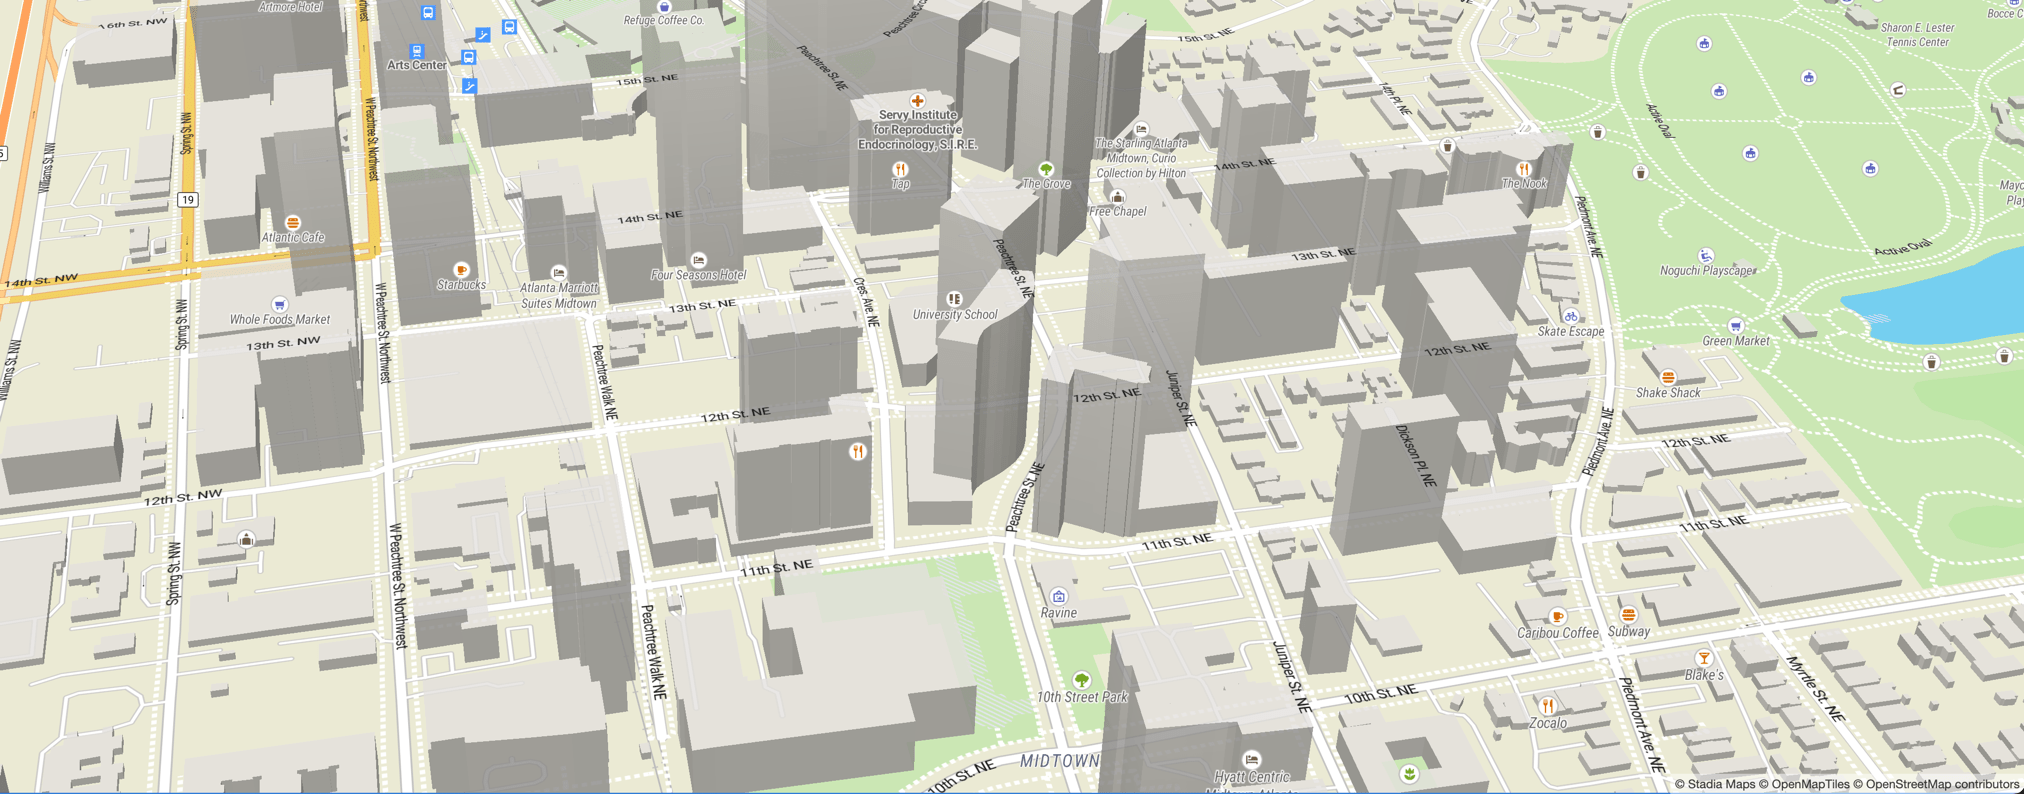 A vector map showing a 3D perspective view of Midtown, Atlanta